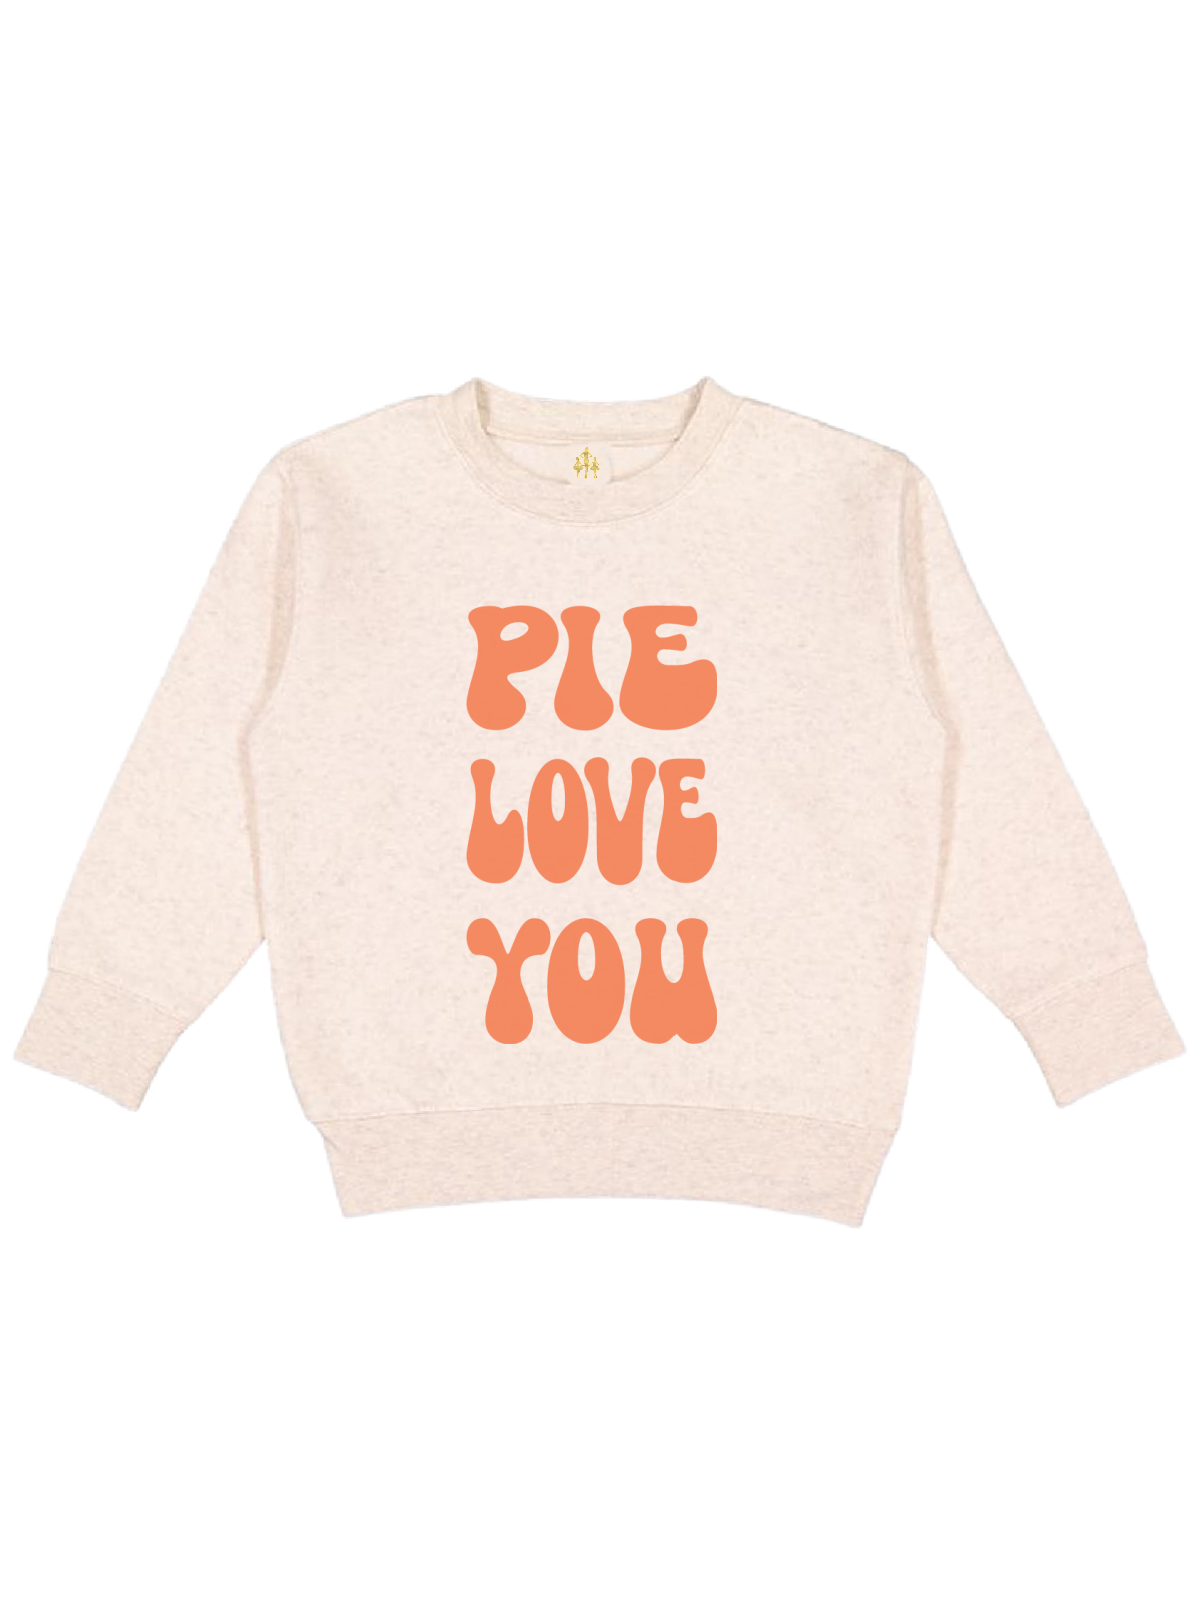 Pie Love You Thanksgiving Sweatshirt for Kids in Natural Heather